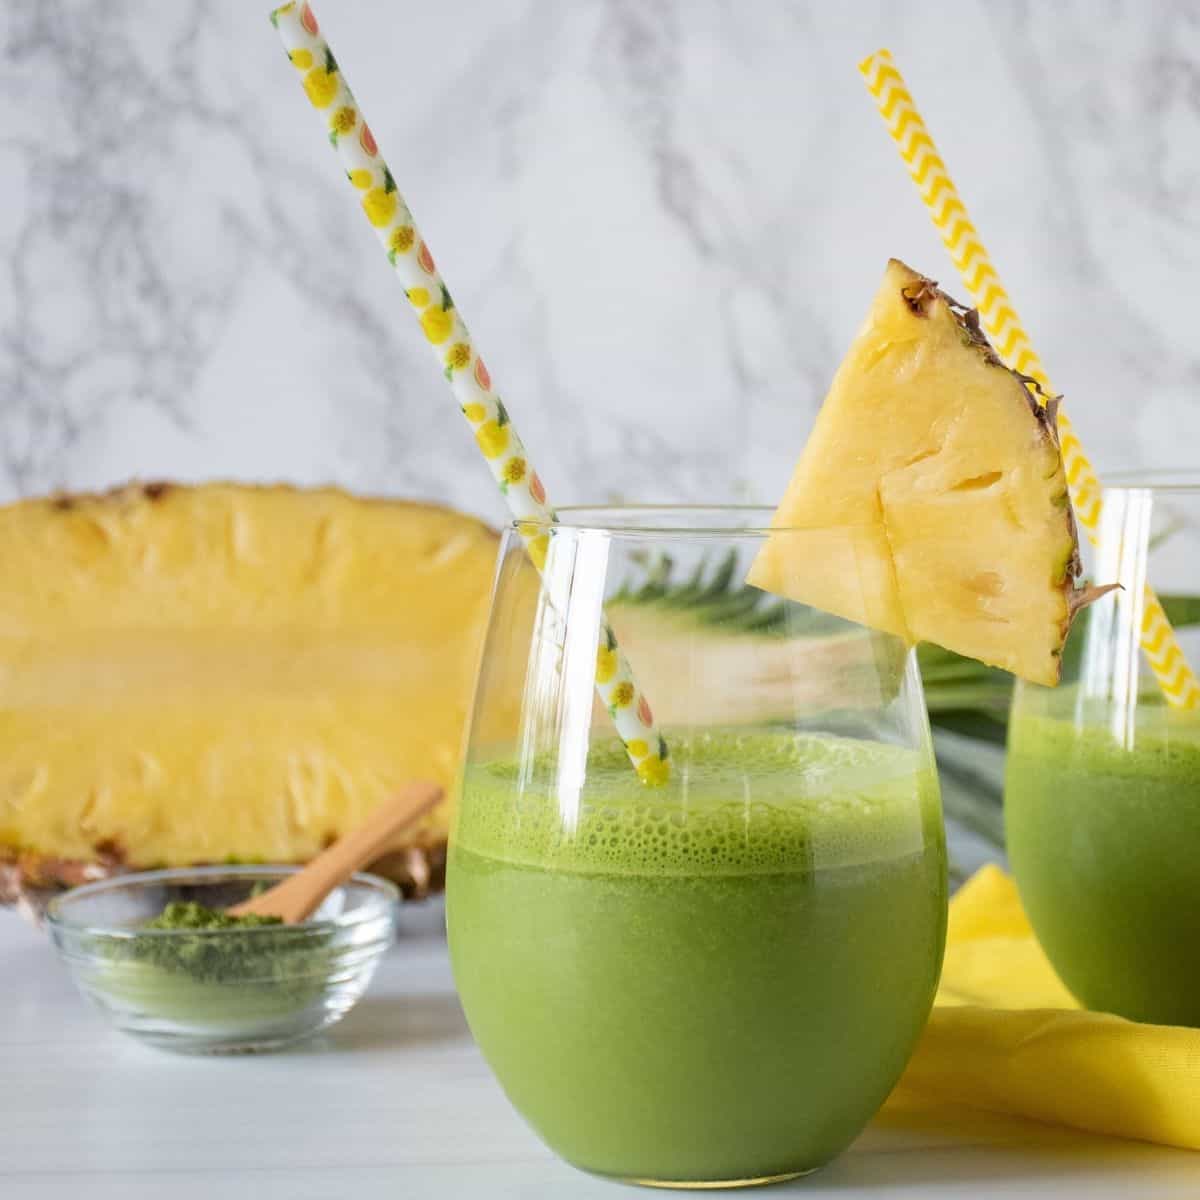 Glass of iced matcha drink, garnished with a pineapple slice.